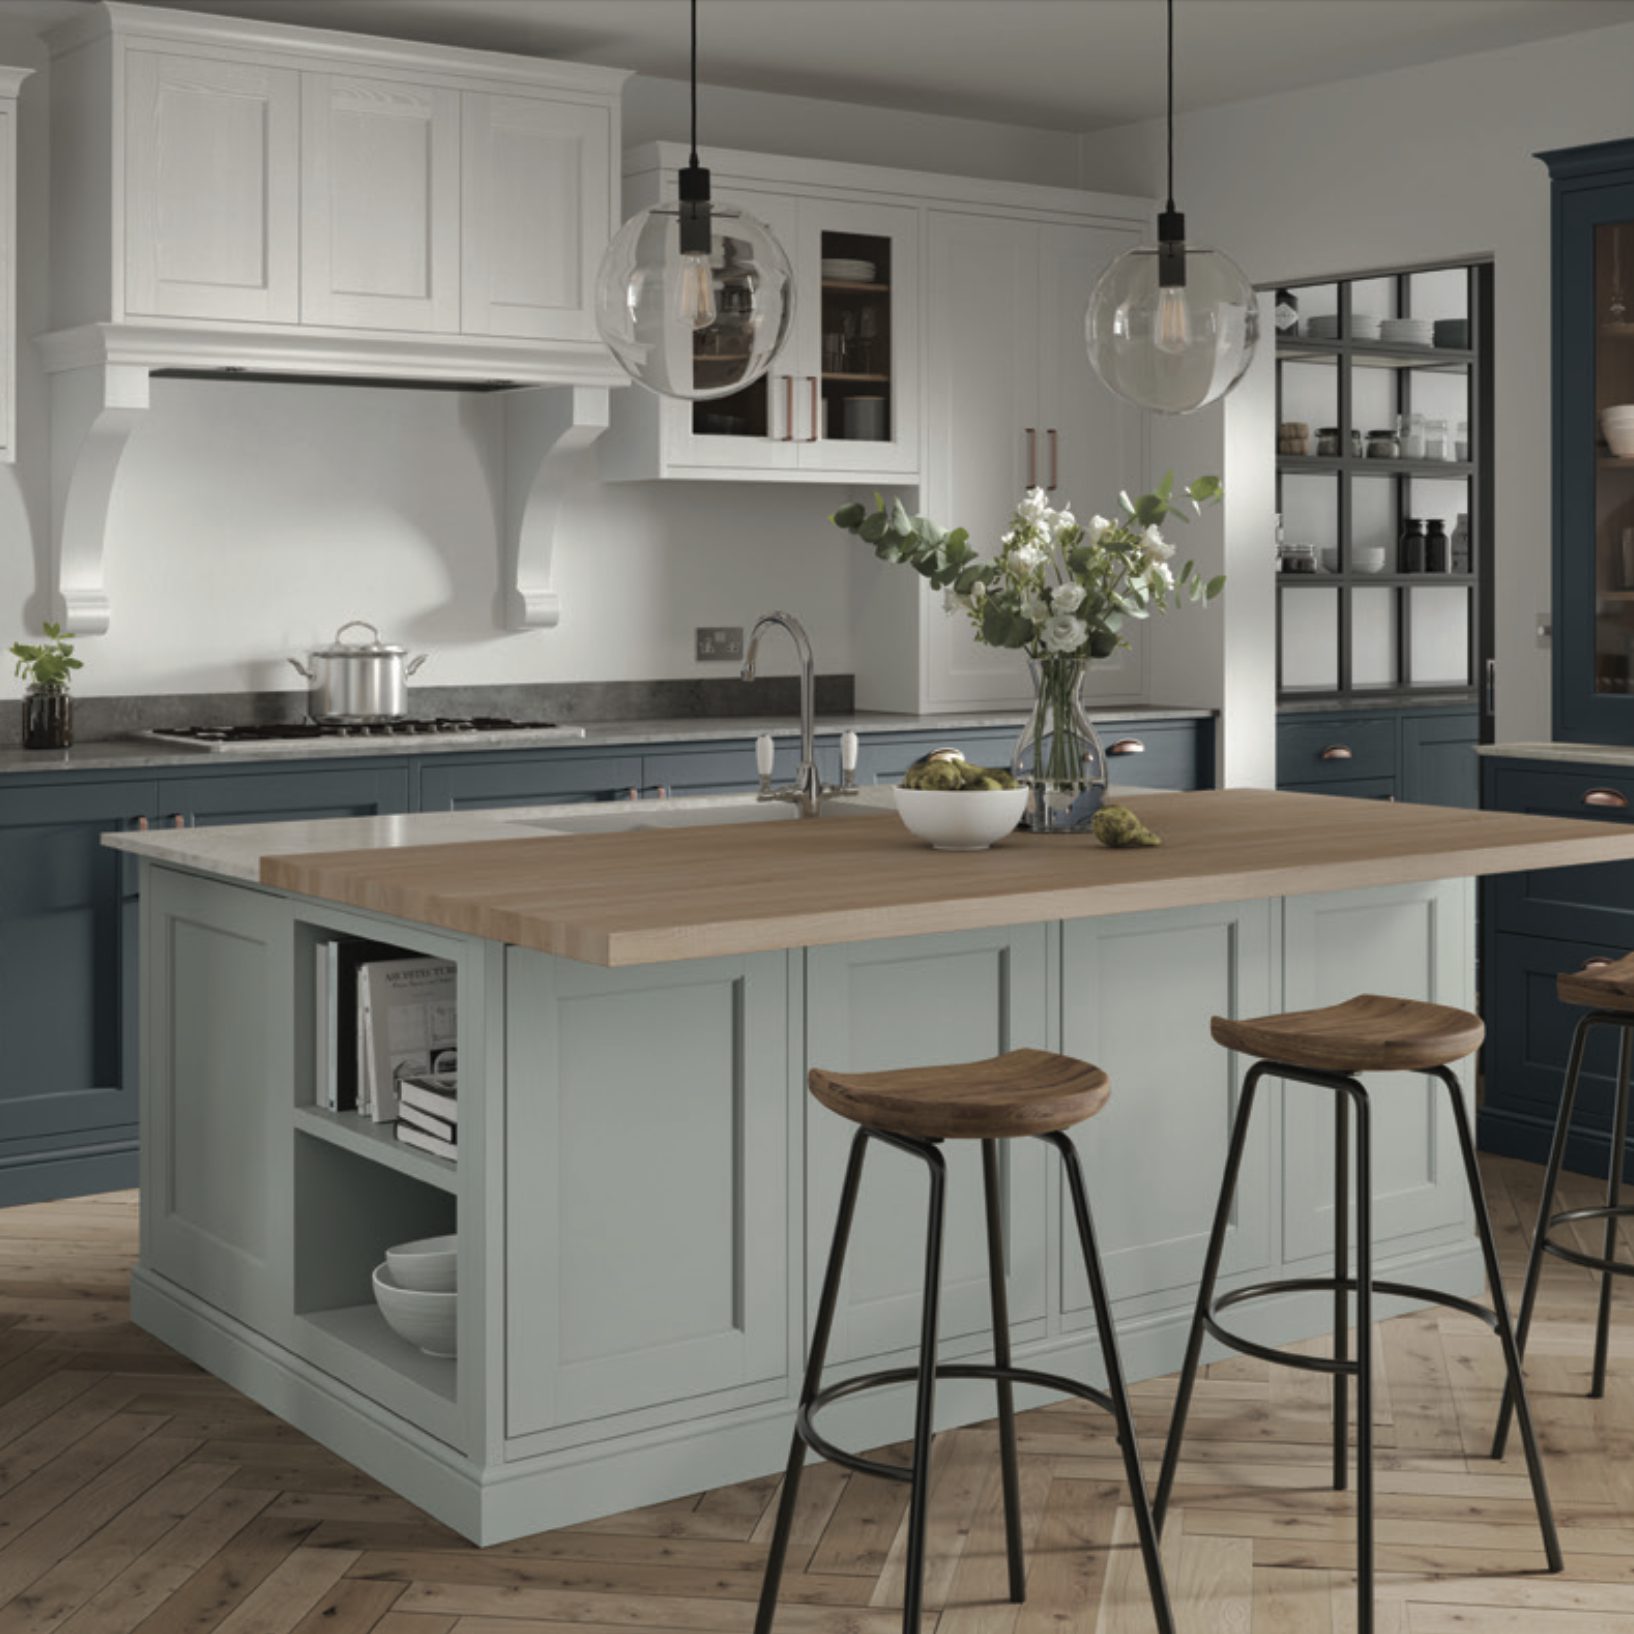 Shaker kitchen in white and blue